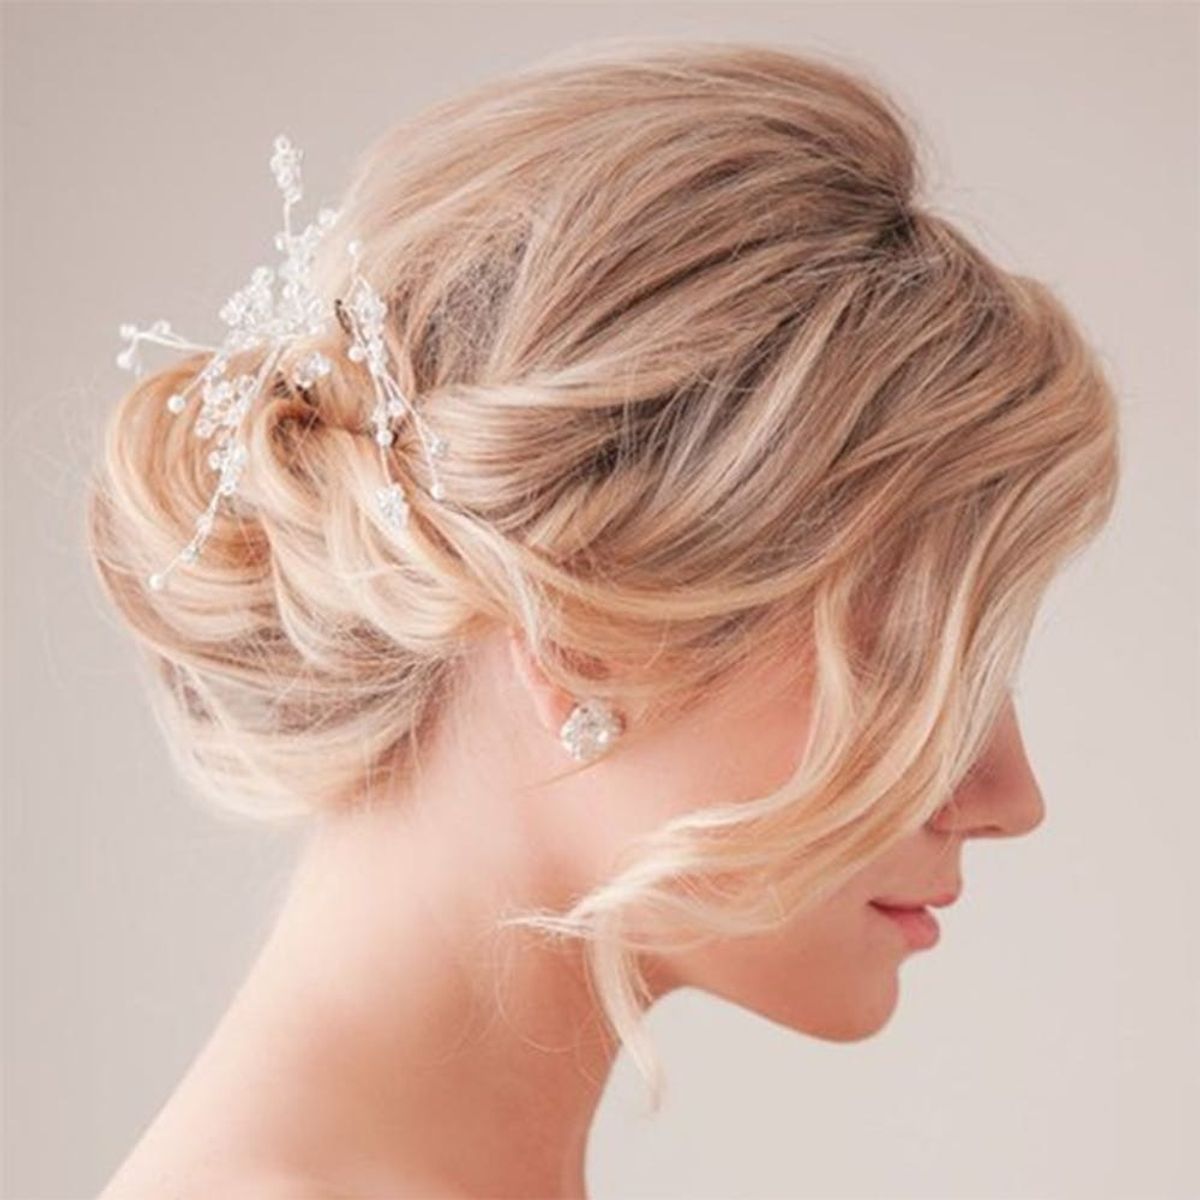 12 Hairstyles for Your Romantic Valentine’s Day Wedding